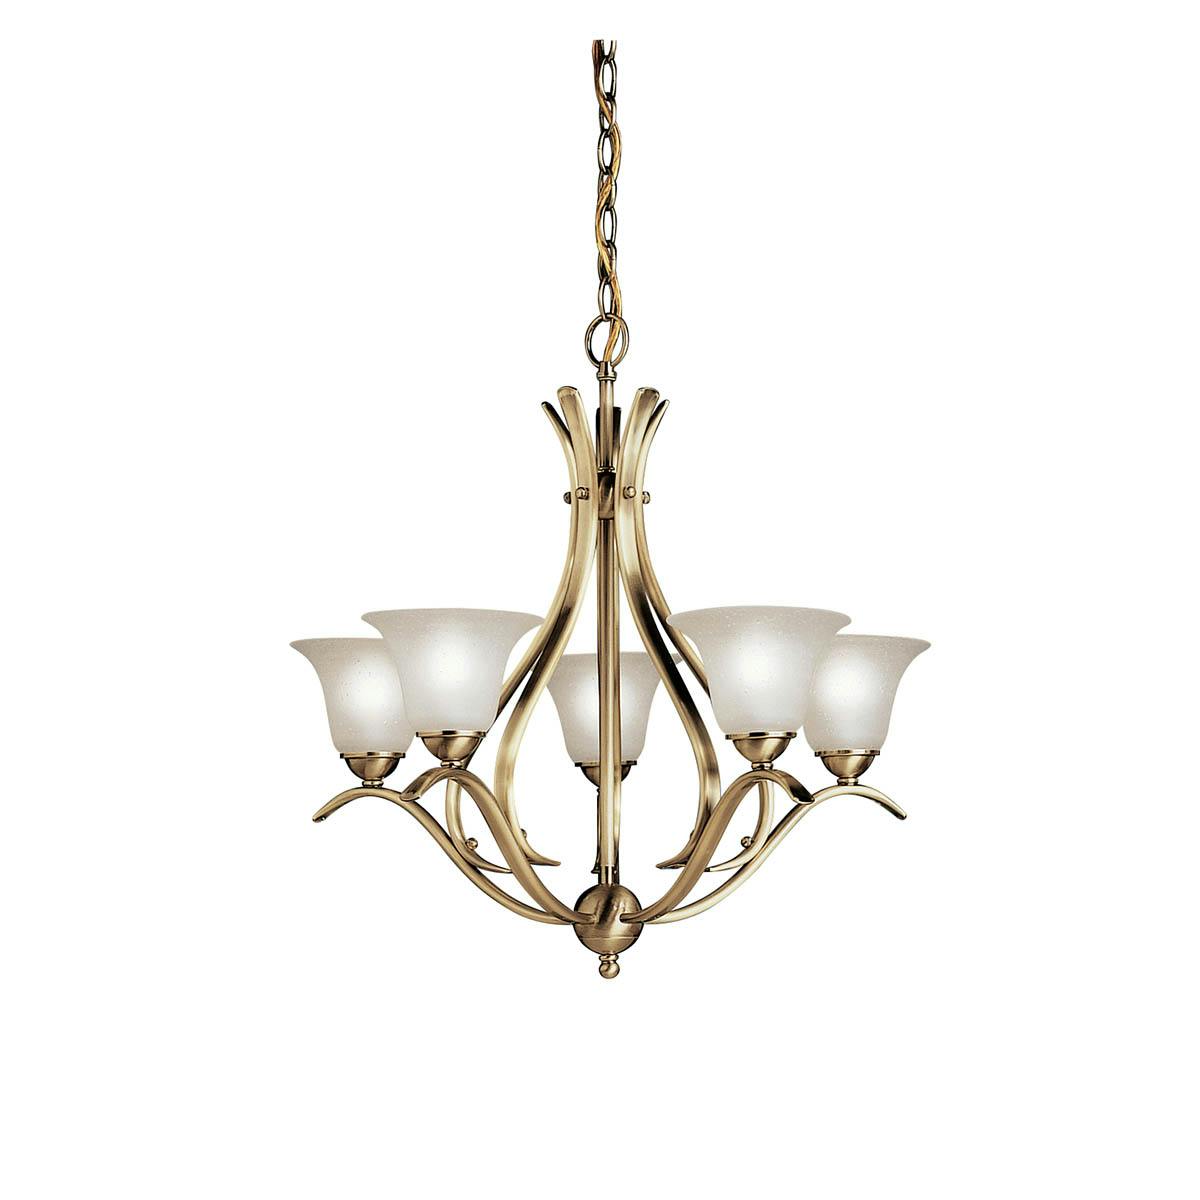 Dover 23" Chandelier in Antique Brass on a white background